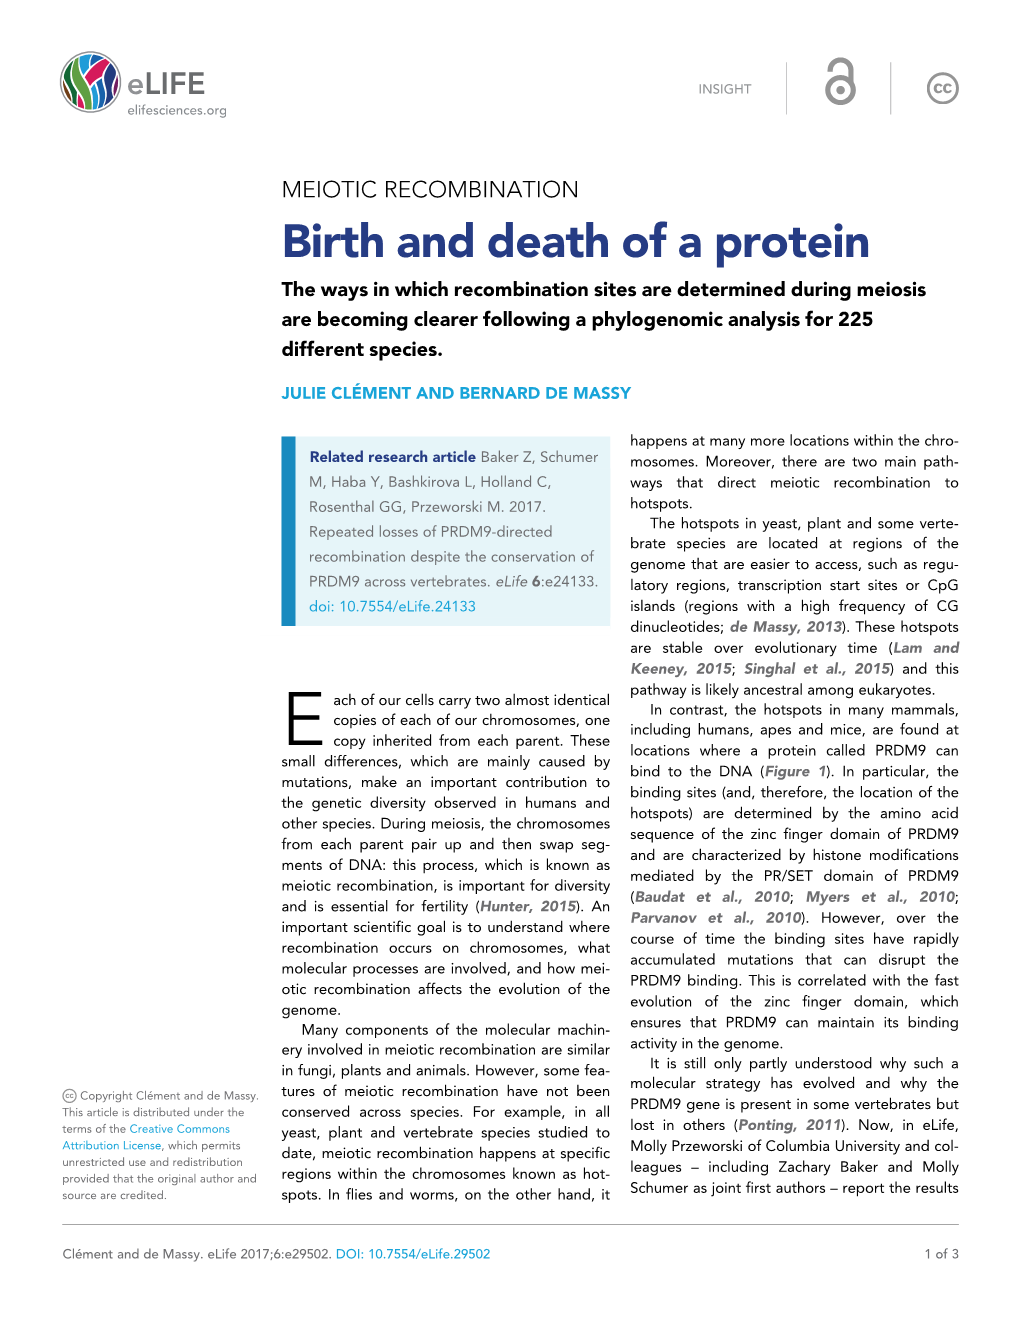 Birth and Death of a Protein